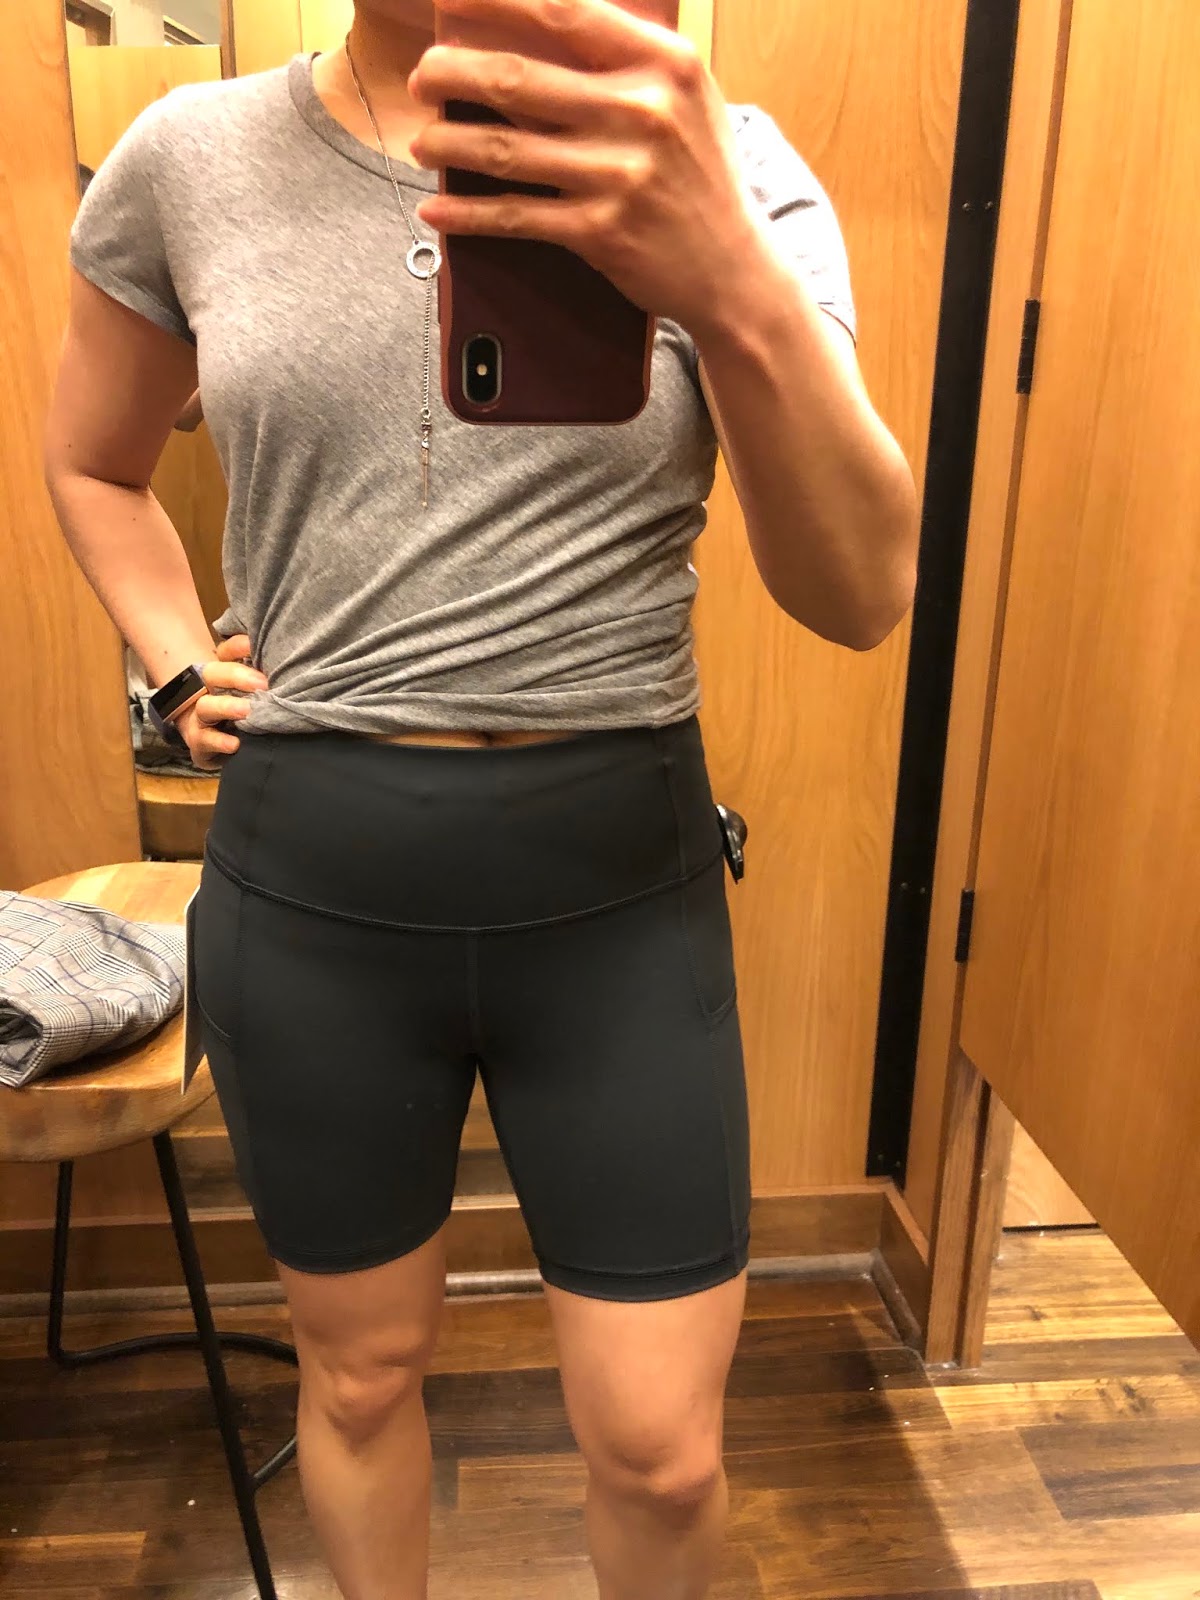 Store Try Ons! Fit Review Shorts! Fast & Free Short 6, On The Fly